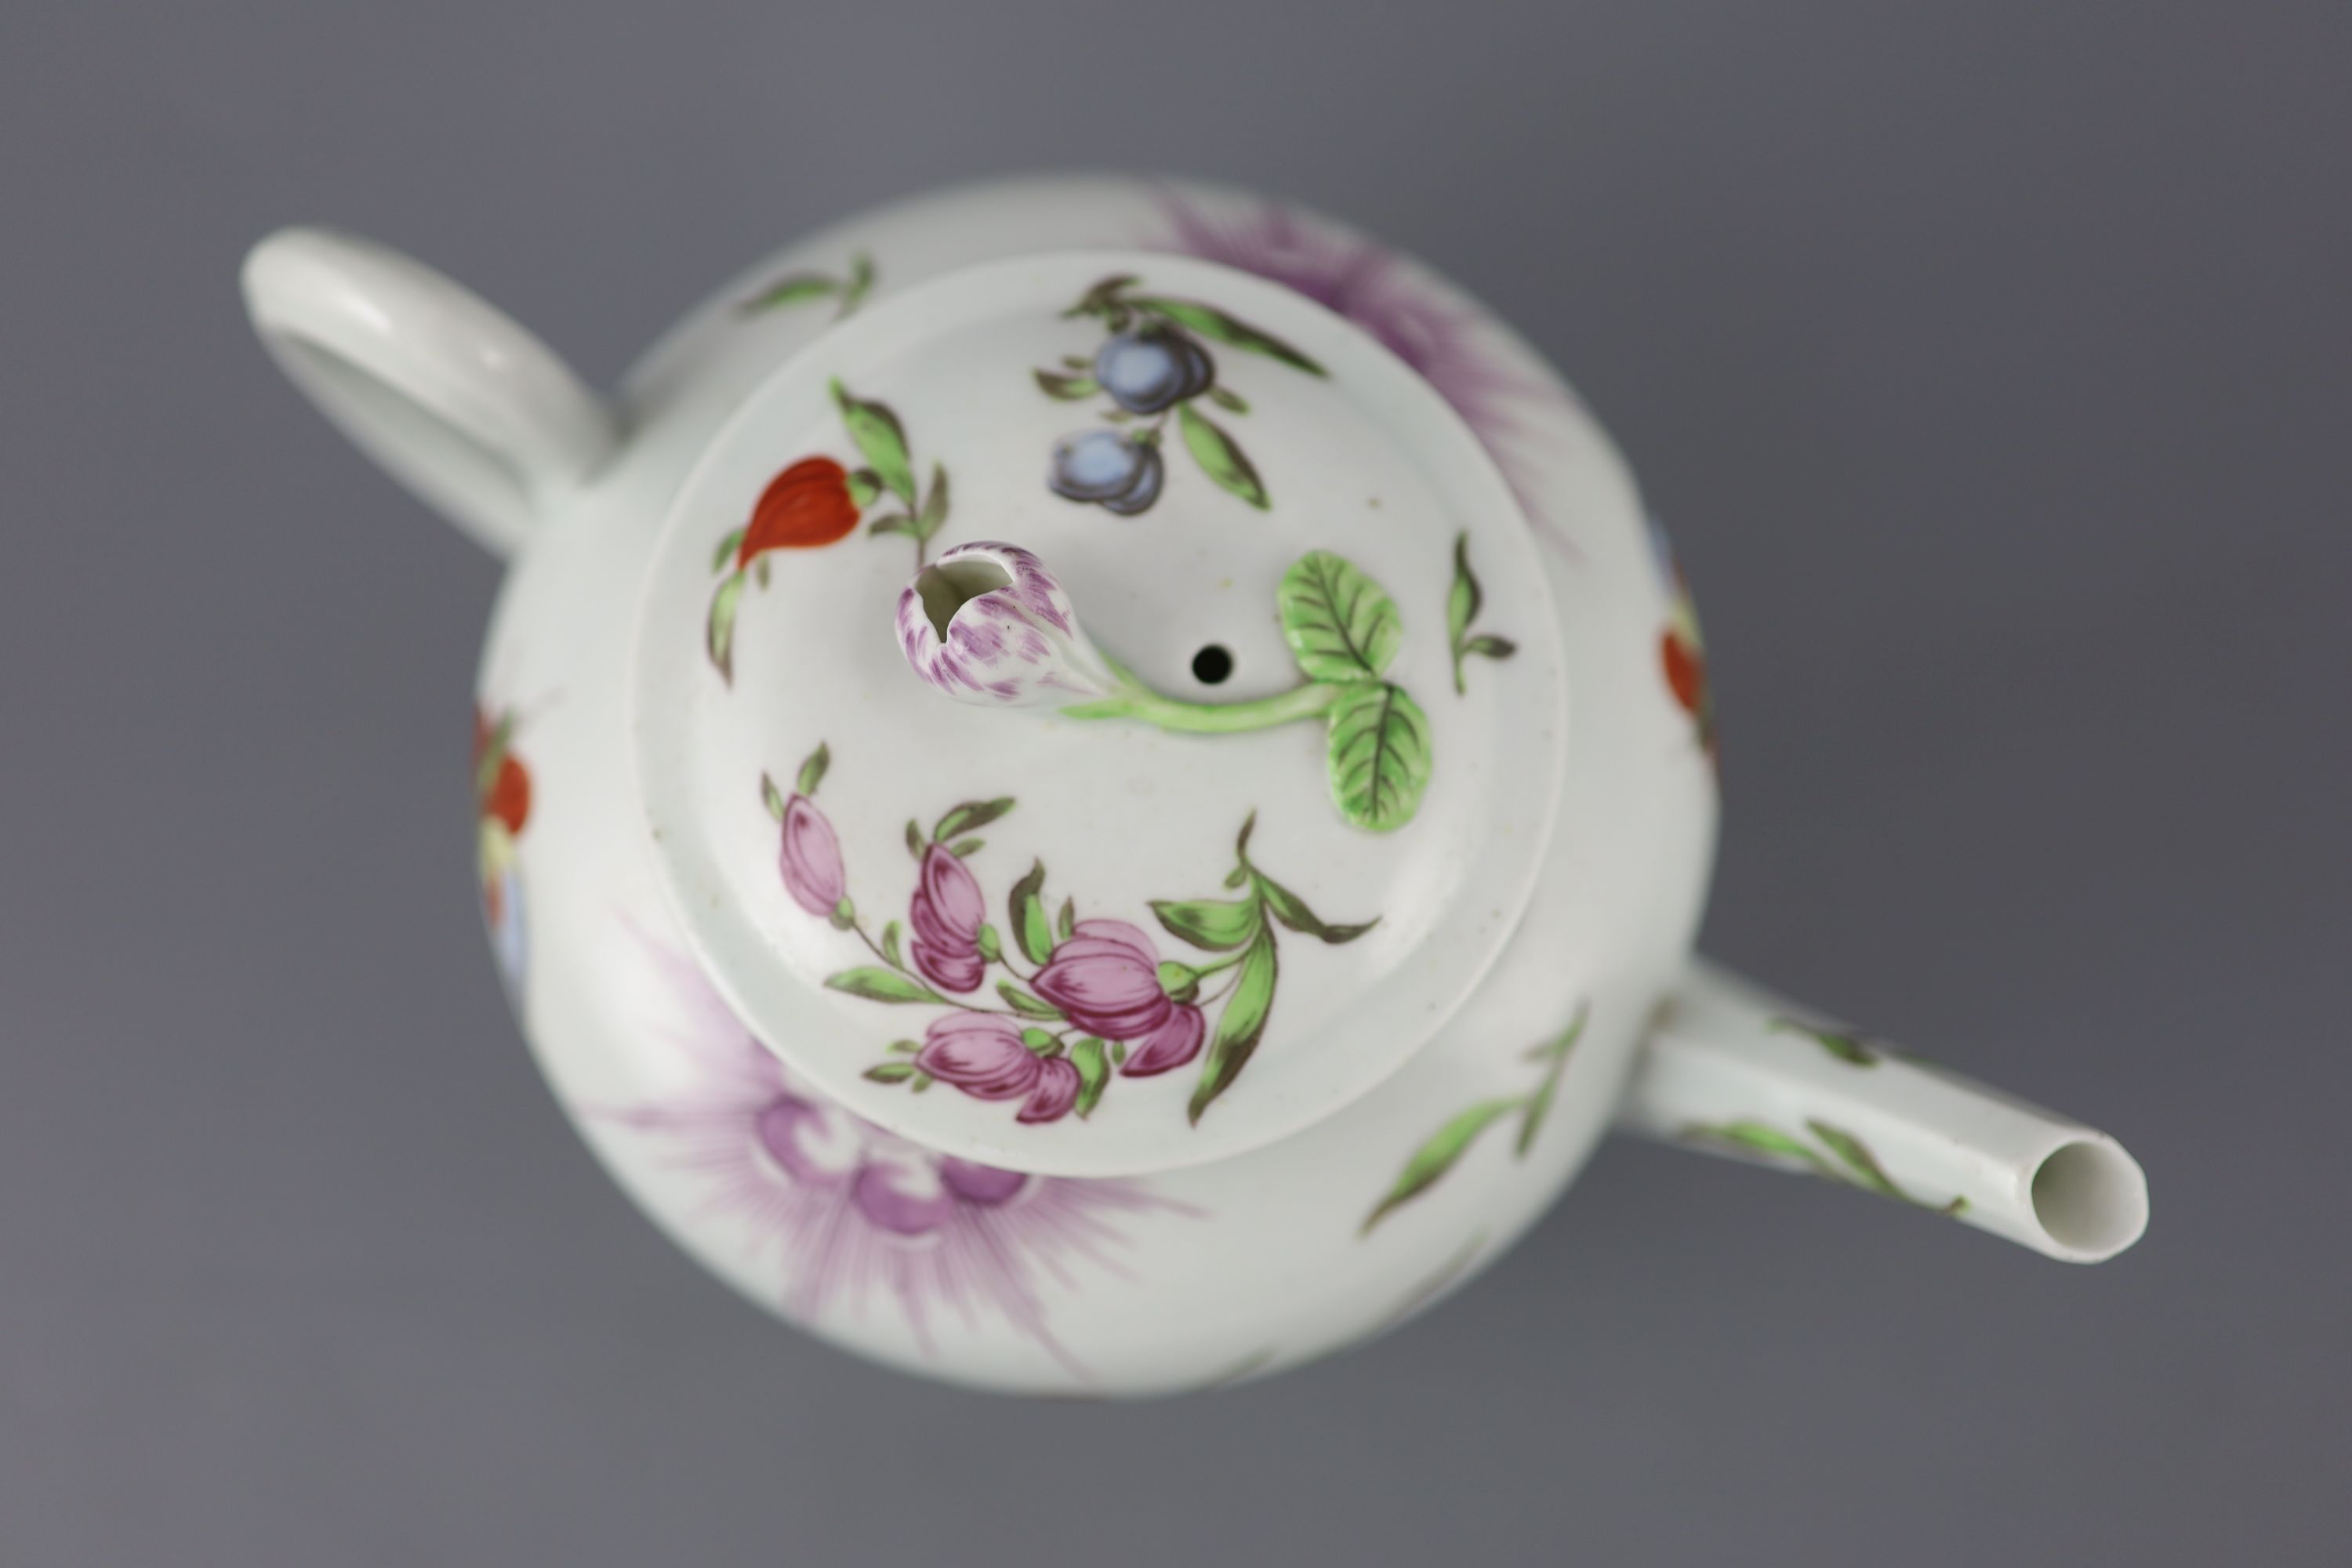 A good Worcester teapot and cover, c.1760, 18.5cm long, ex David Butti collection no.184